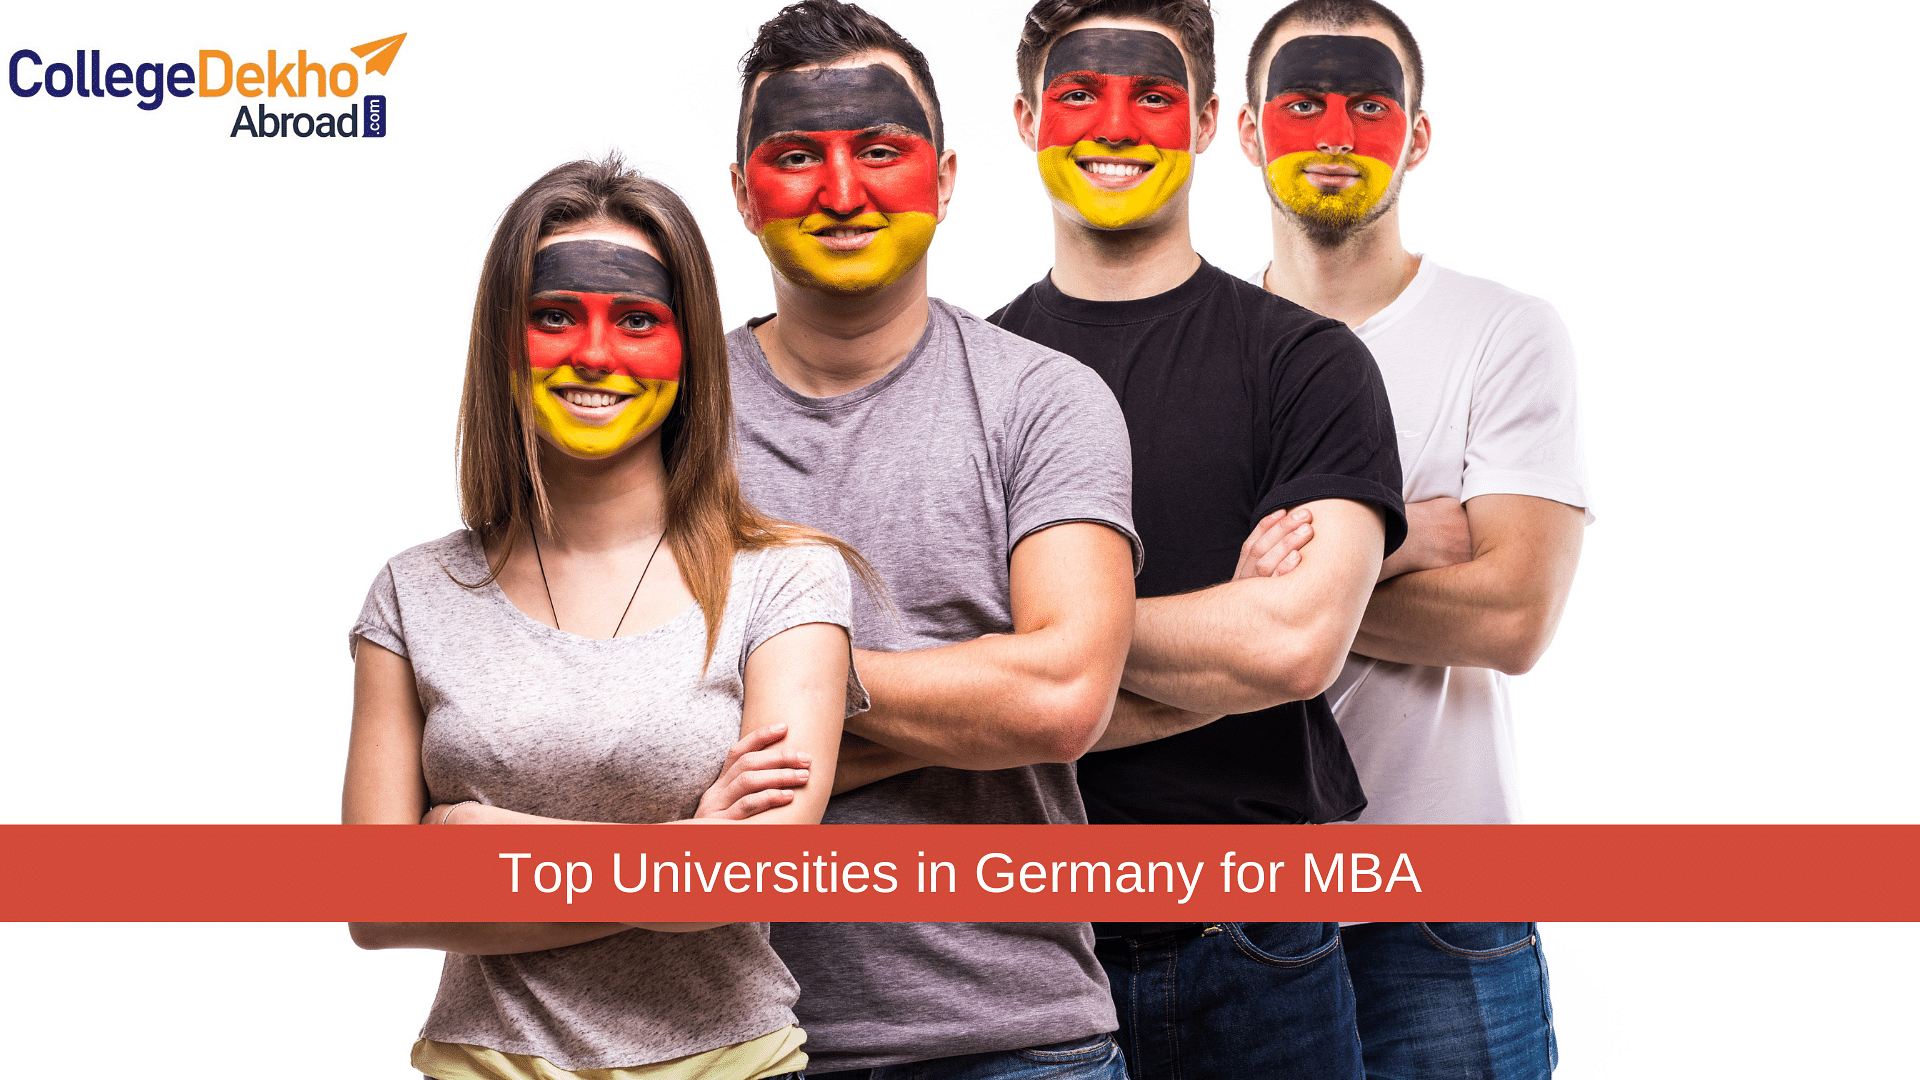 List of Top Universities in Germany for MBA